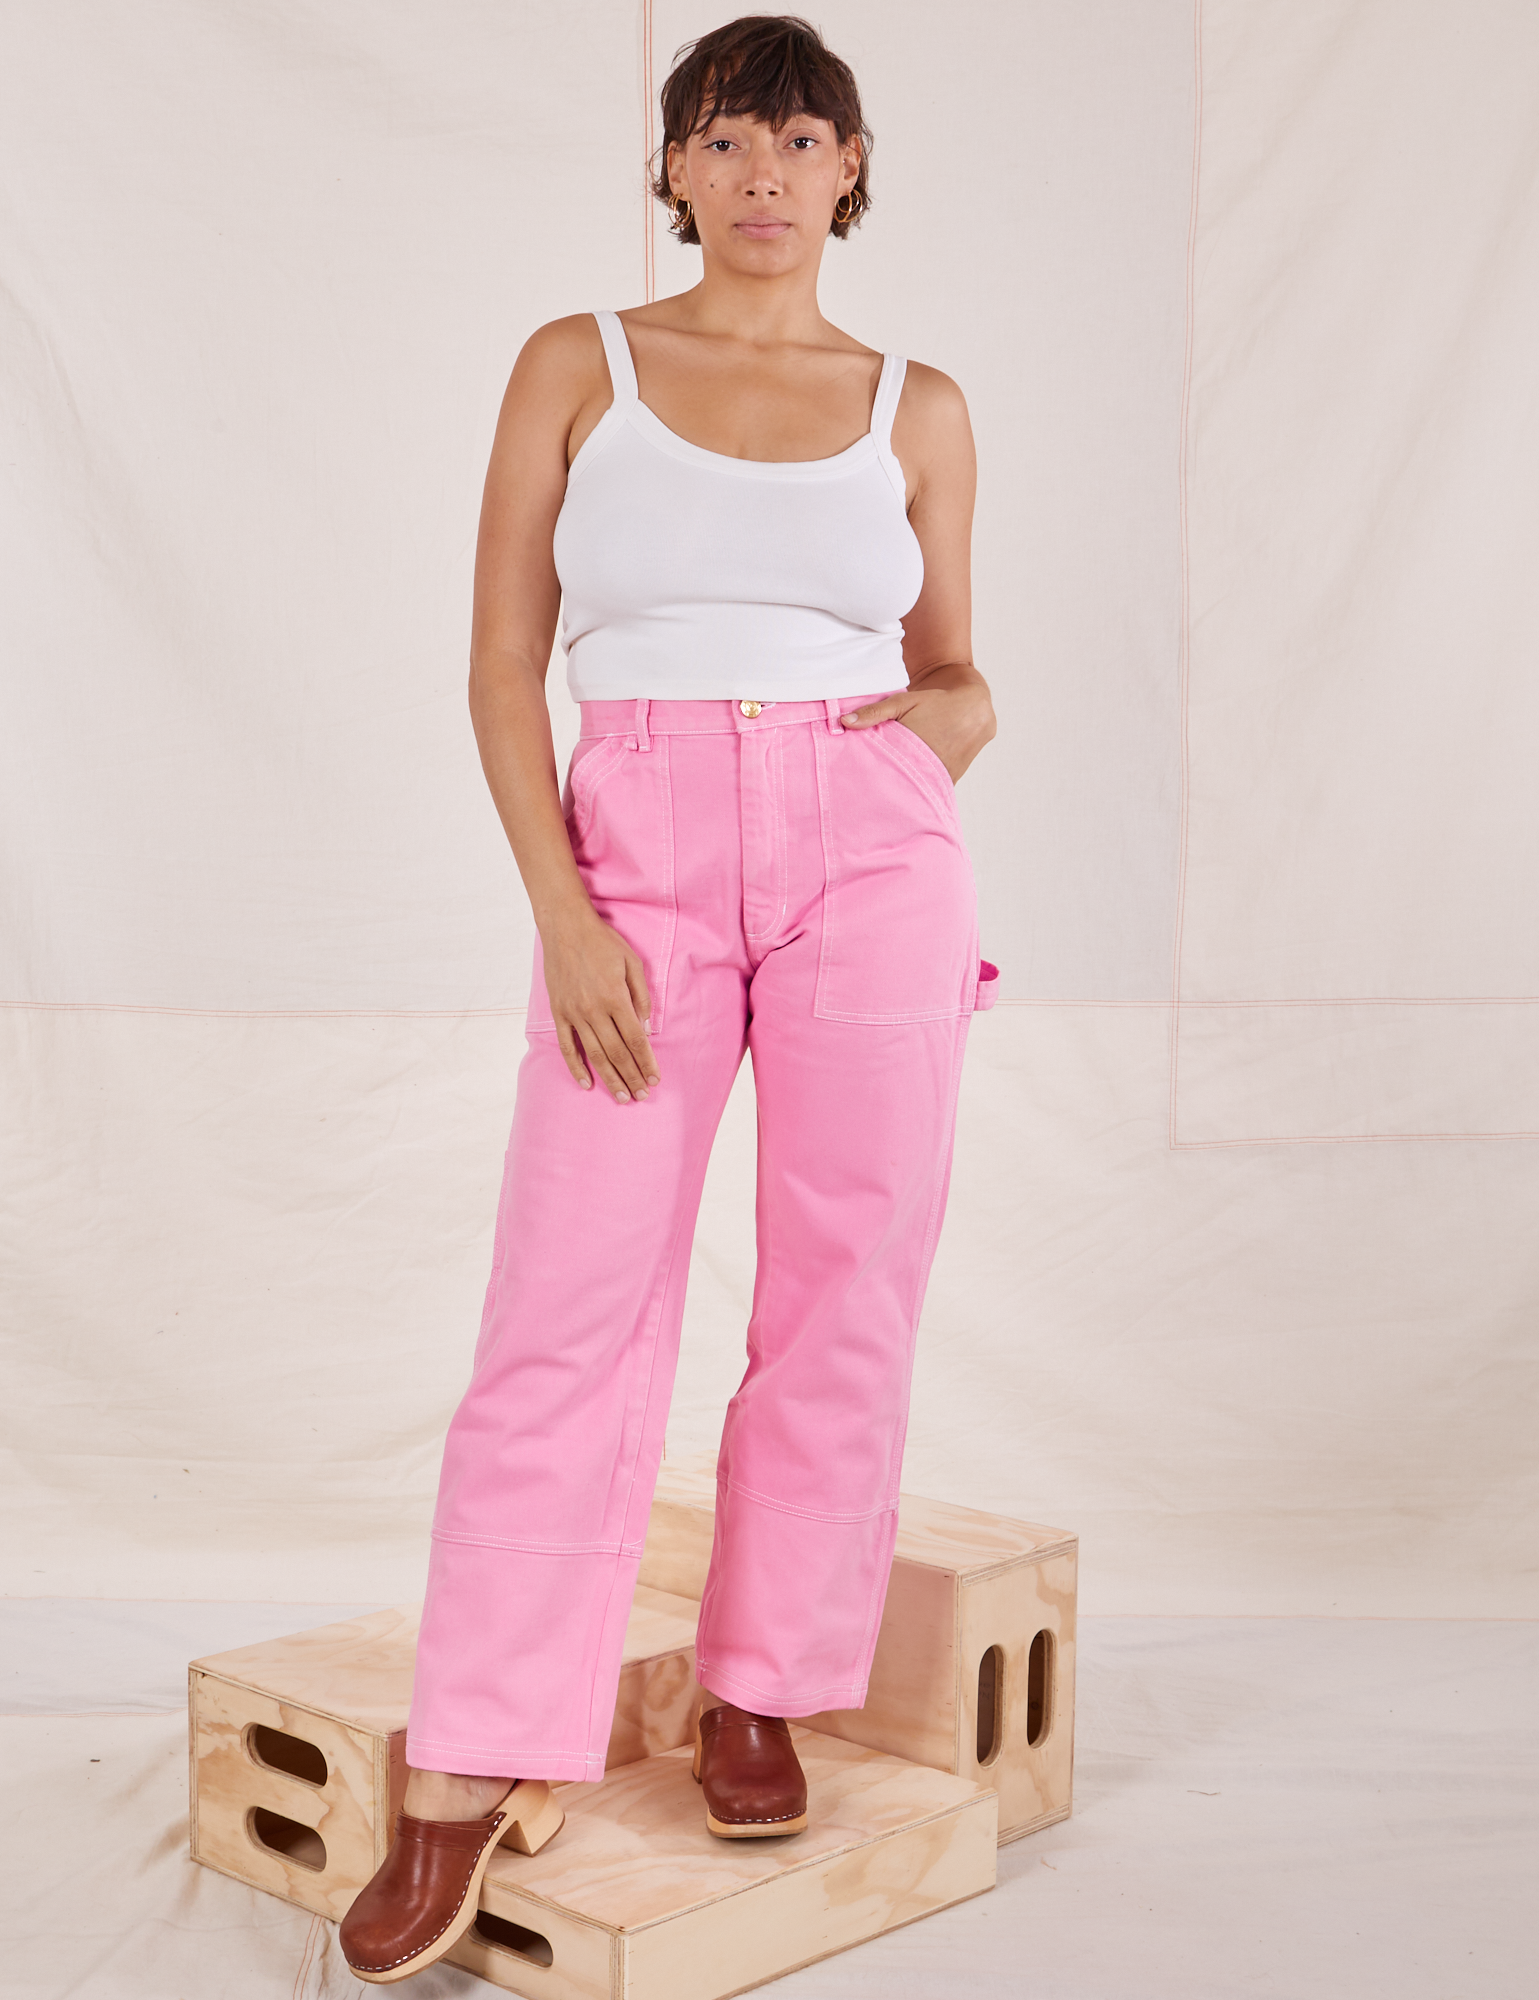 Tiara is 5&#39;4&quot; and wearing S Carpenter Jeans in Bubblegum Pink paired with Cropped Cami in vintage tee off-white